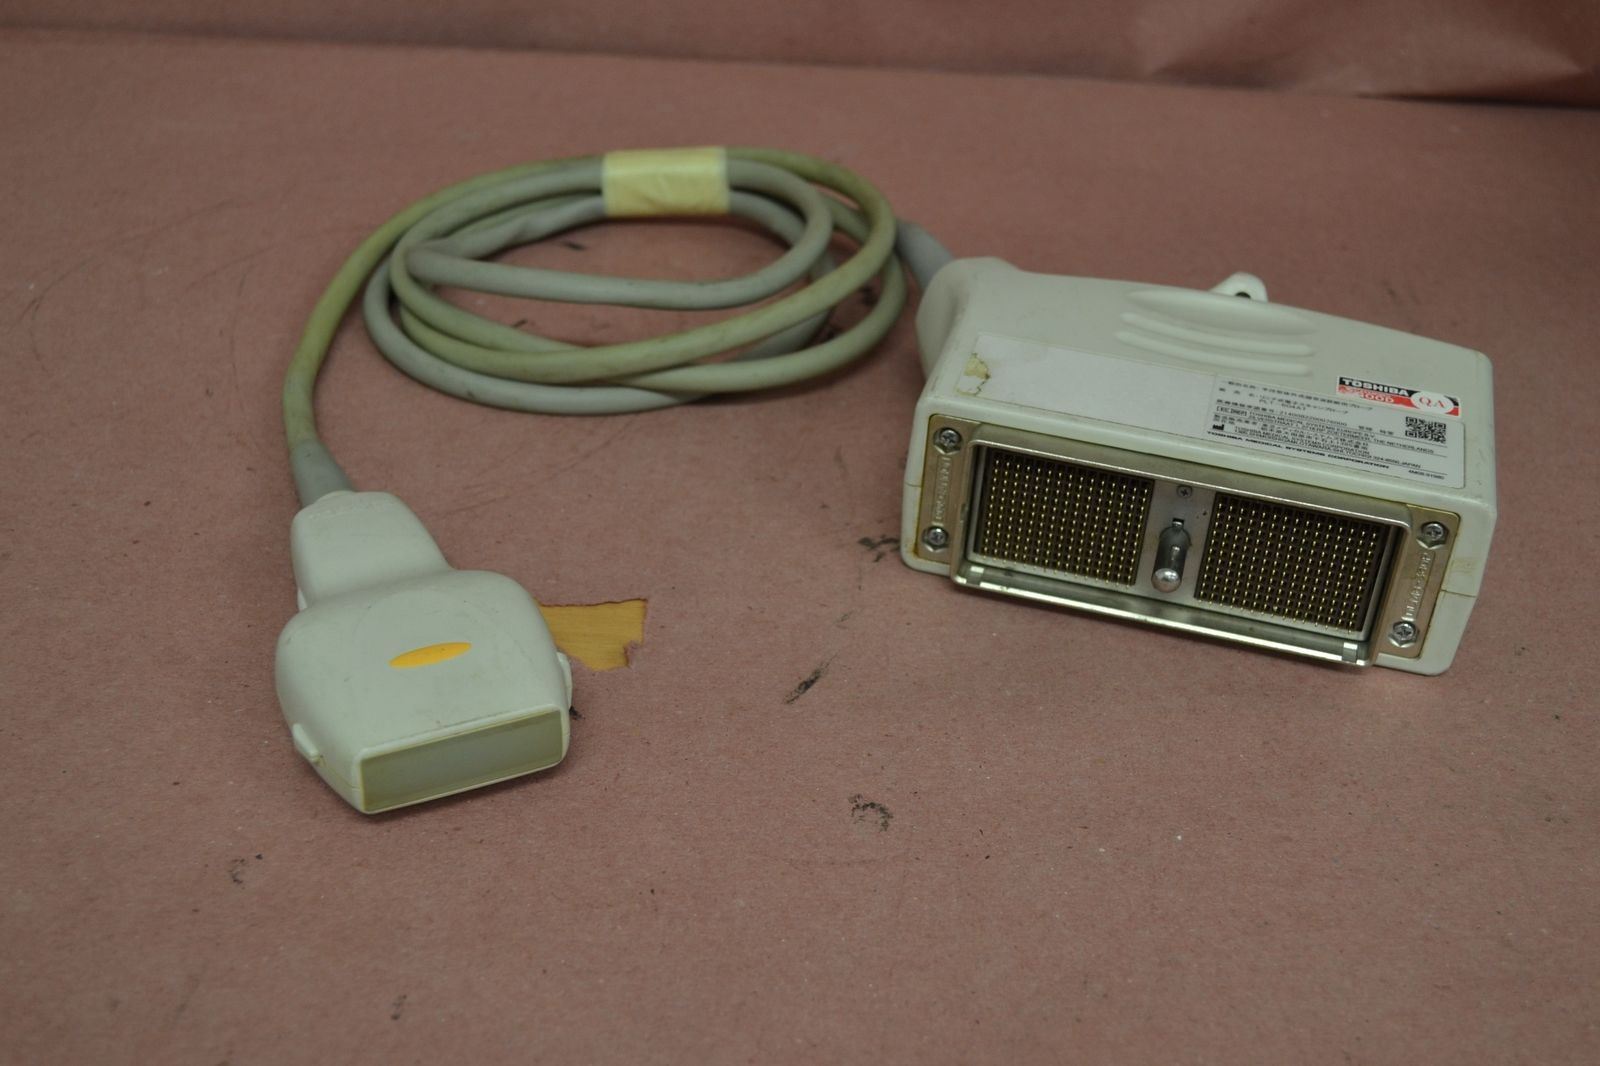 Toshiba Xario PLT-604AT 9.2-4MHz Linear Ultrasound Transducer Probe DIAGNOSTIC ULTRASOUND MACHINES FOR SALE